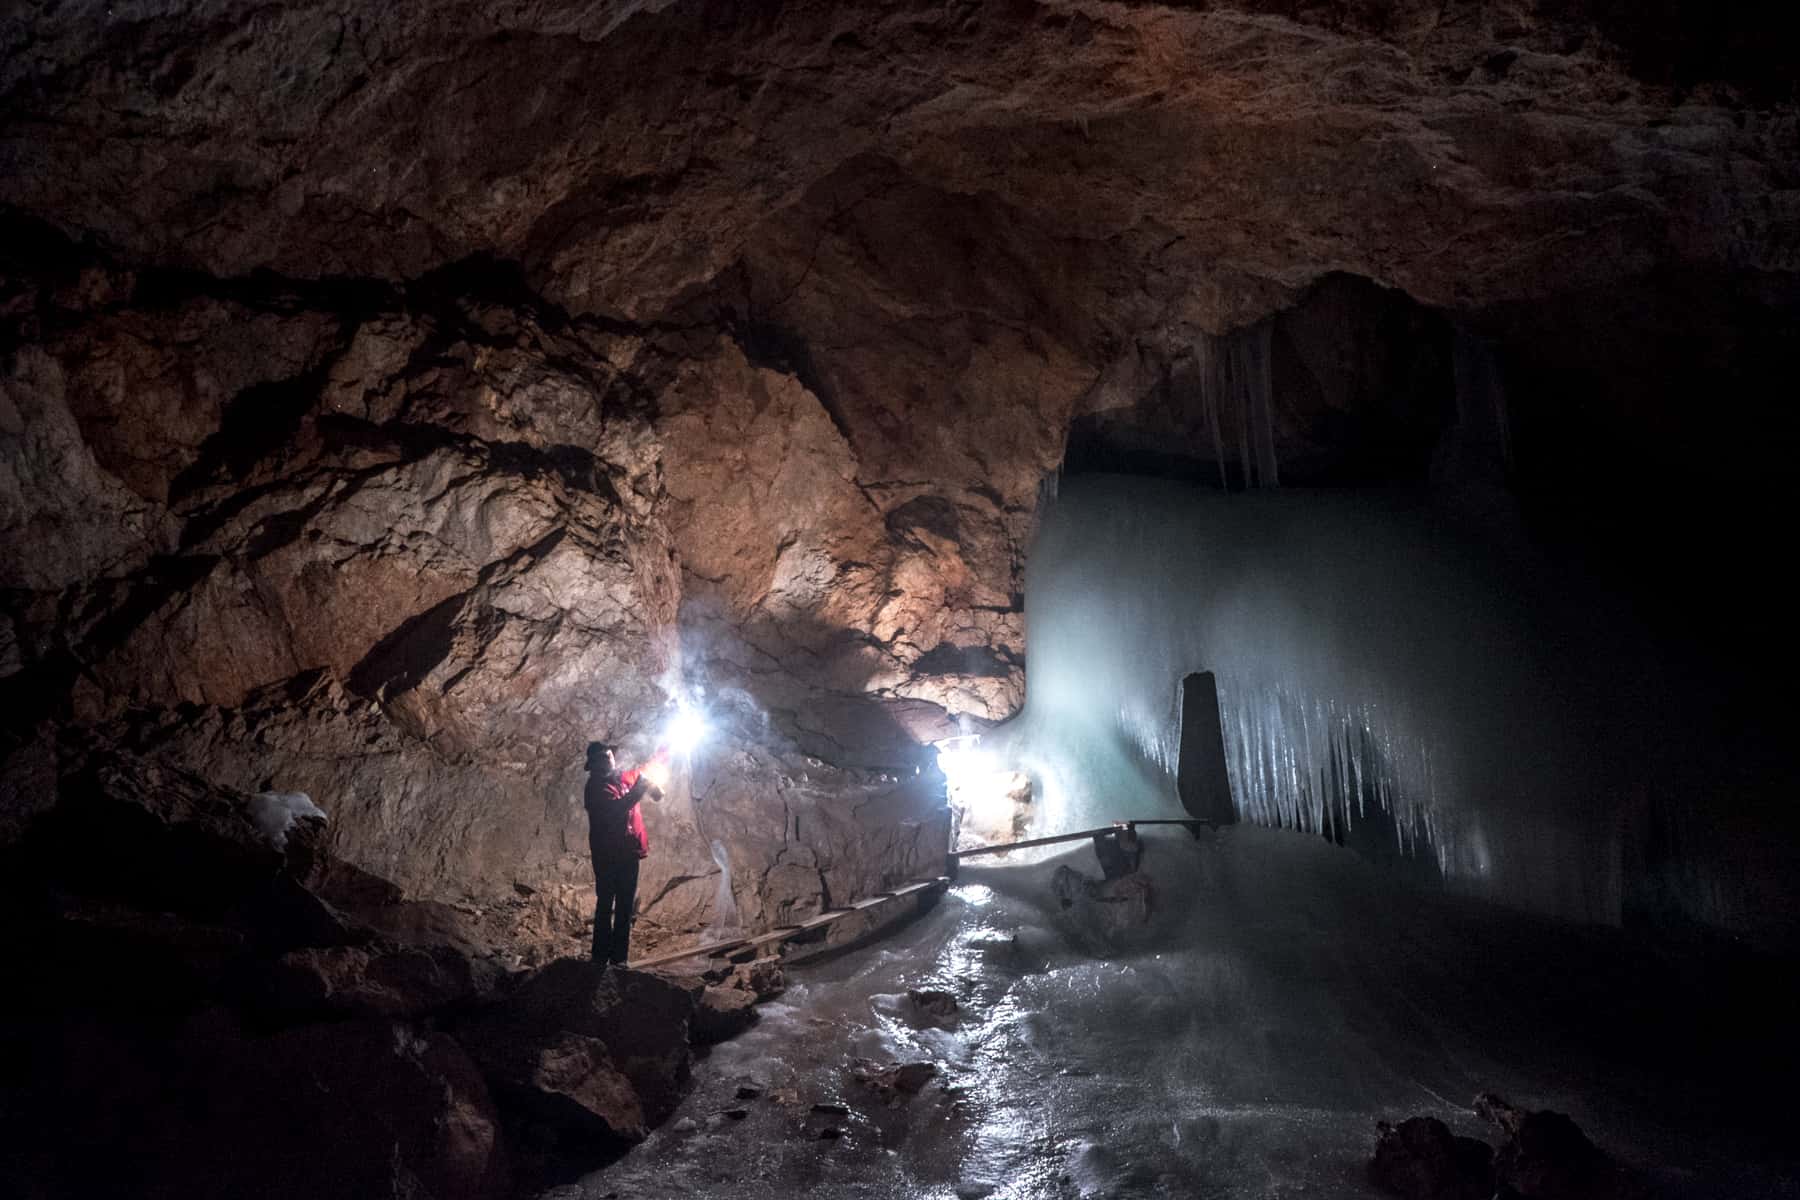 A guide in a red coat, holding a sparking light stands with a cave system next to a sheet of blue ice in Eisriesenwelt, Austria